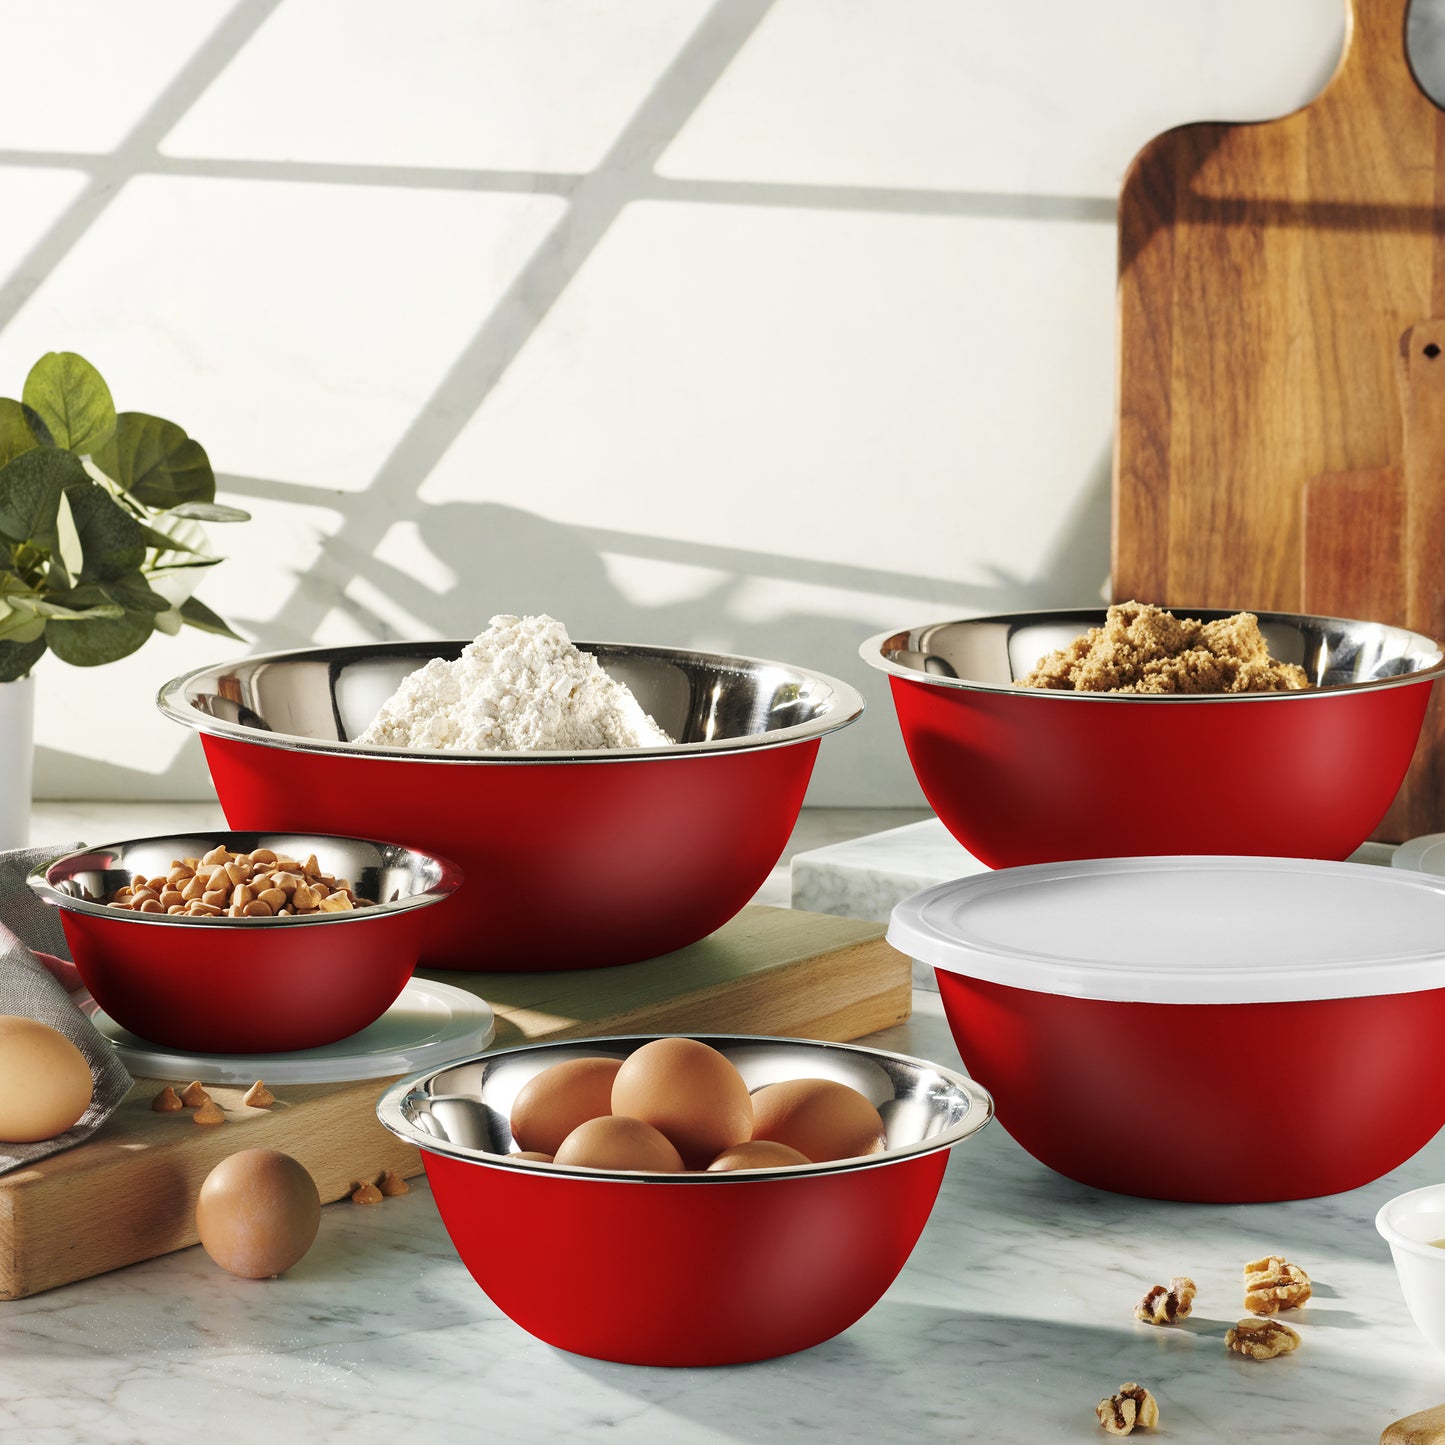 Whysko Stainless Steel Mixing Bowls with Lids Set, 5 Sizes Nesting Mixing Bowls for Your Kitchen Meal Prep, Cooking, Baking, and Food Storage (Red